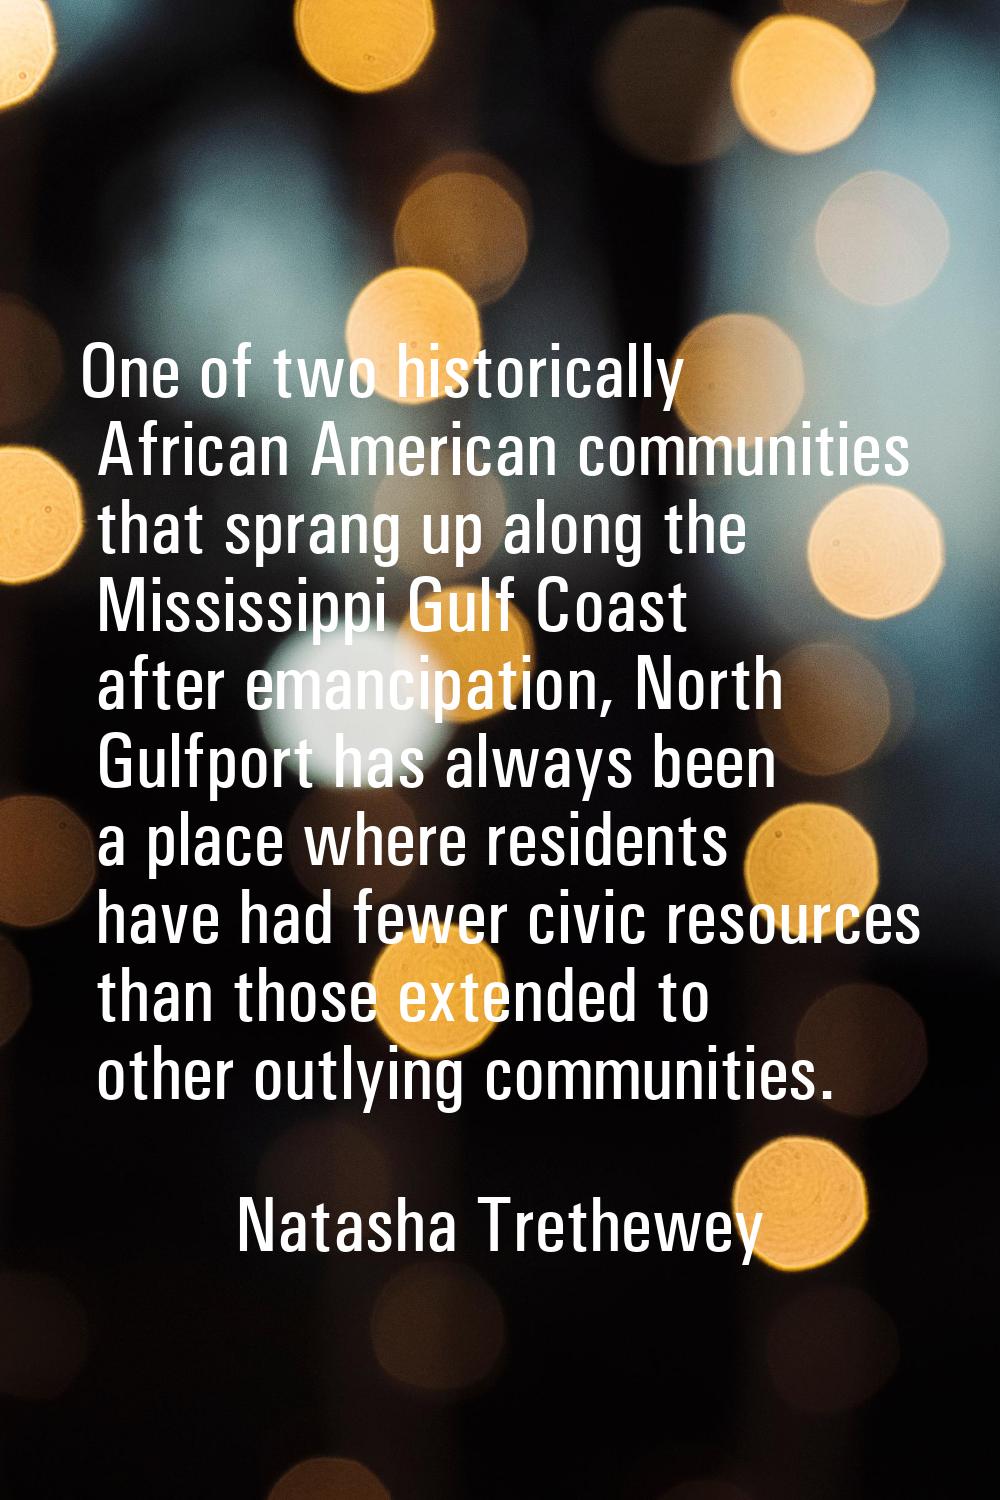 One of two historically African American communities that sprang up along the Mississippi Gulf Coas